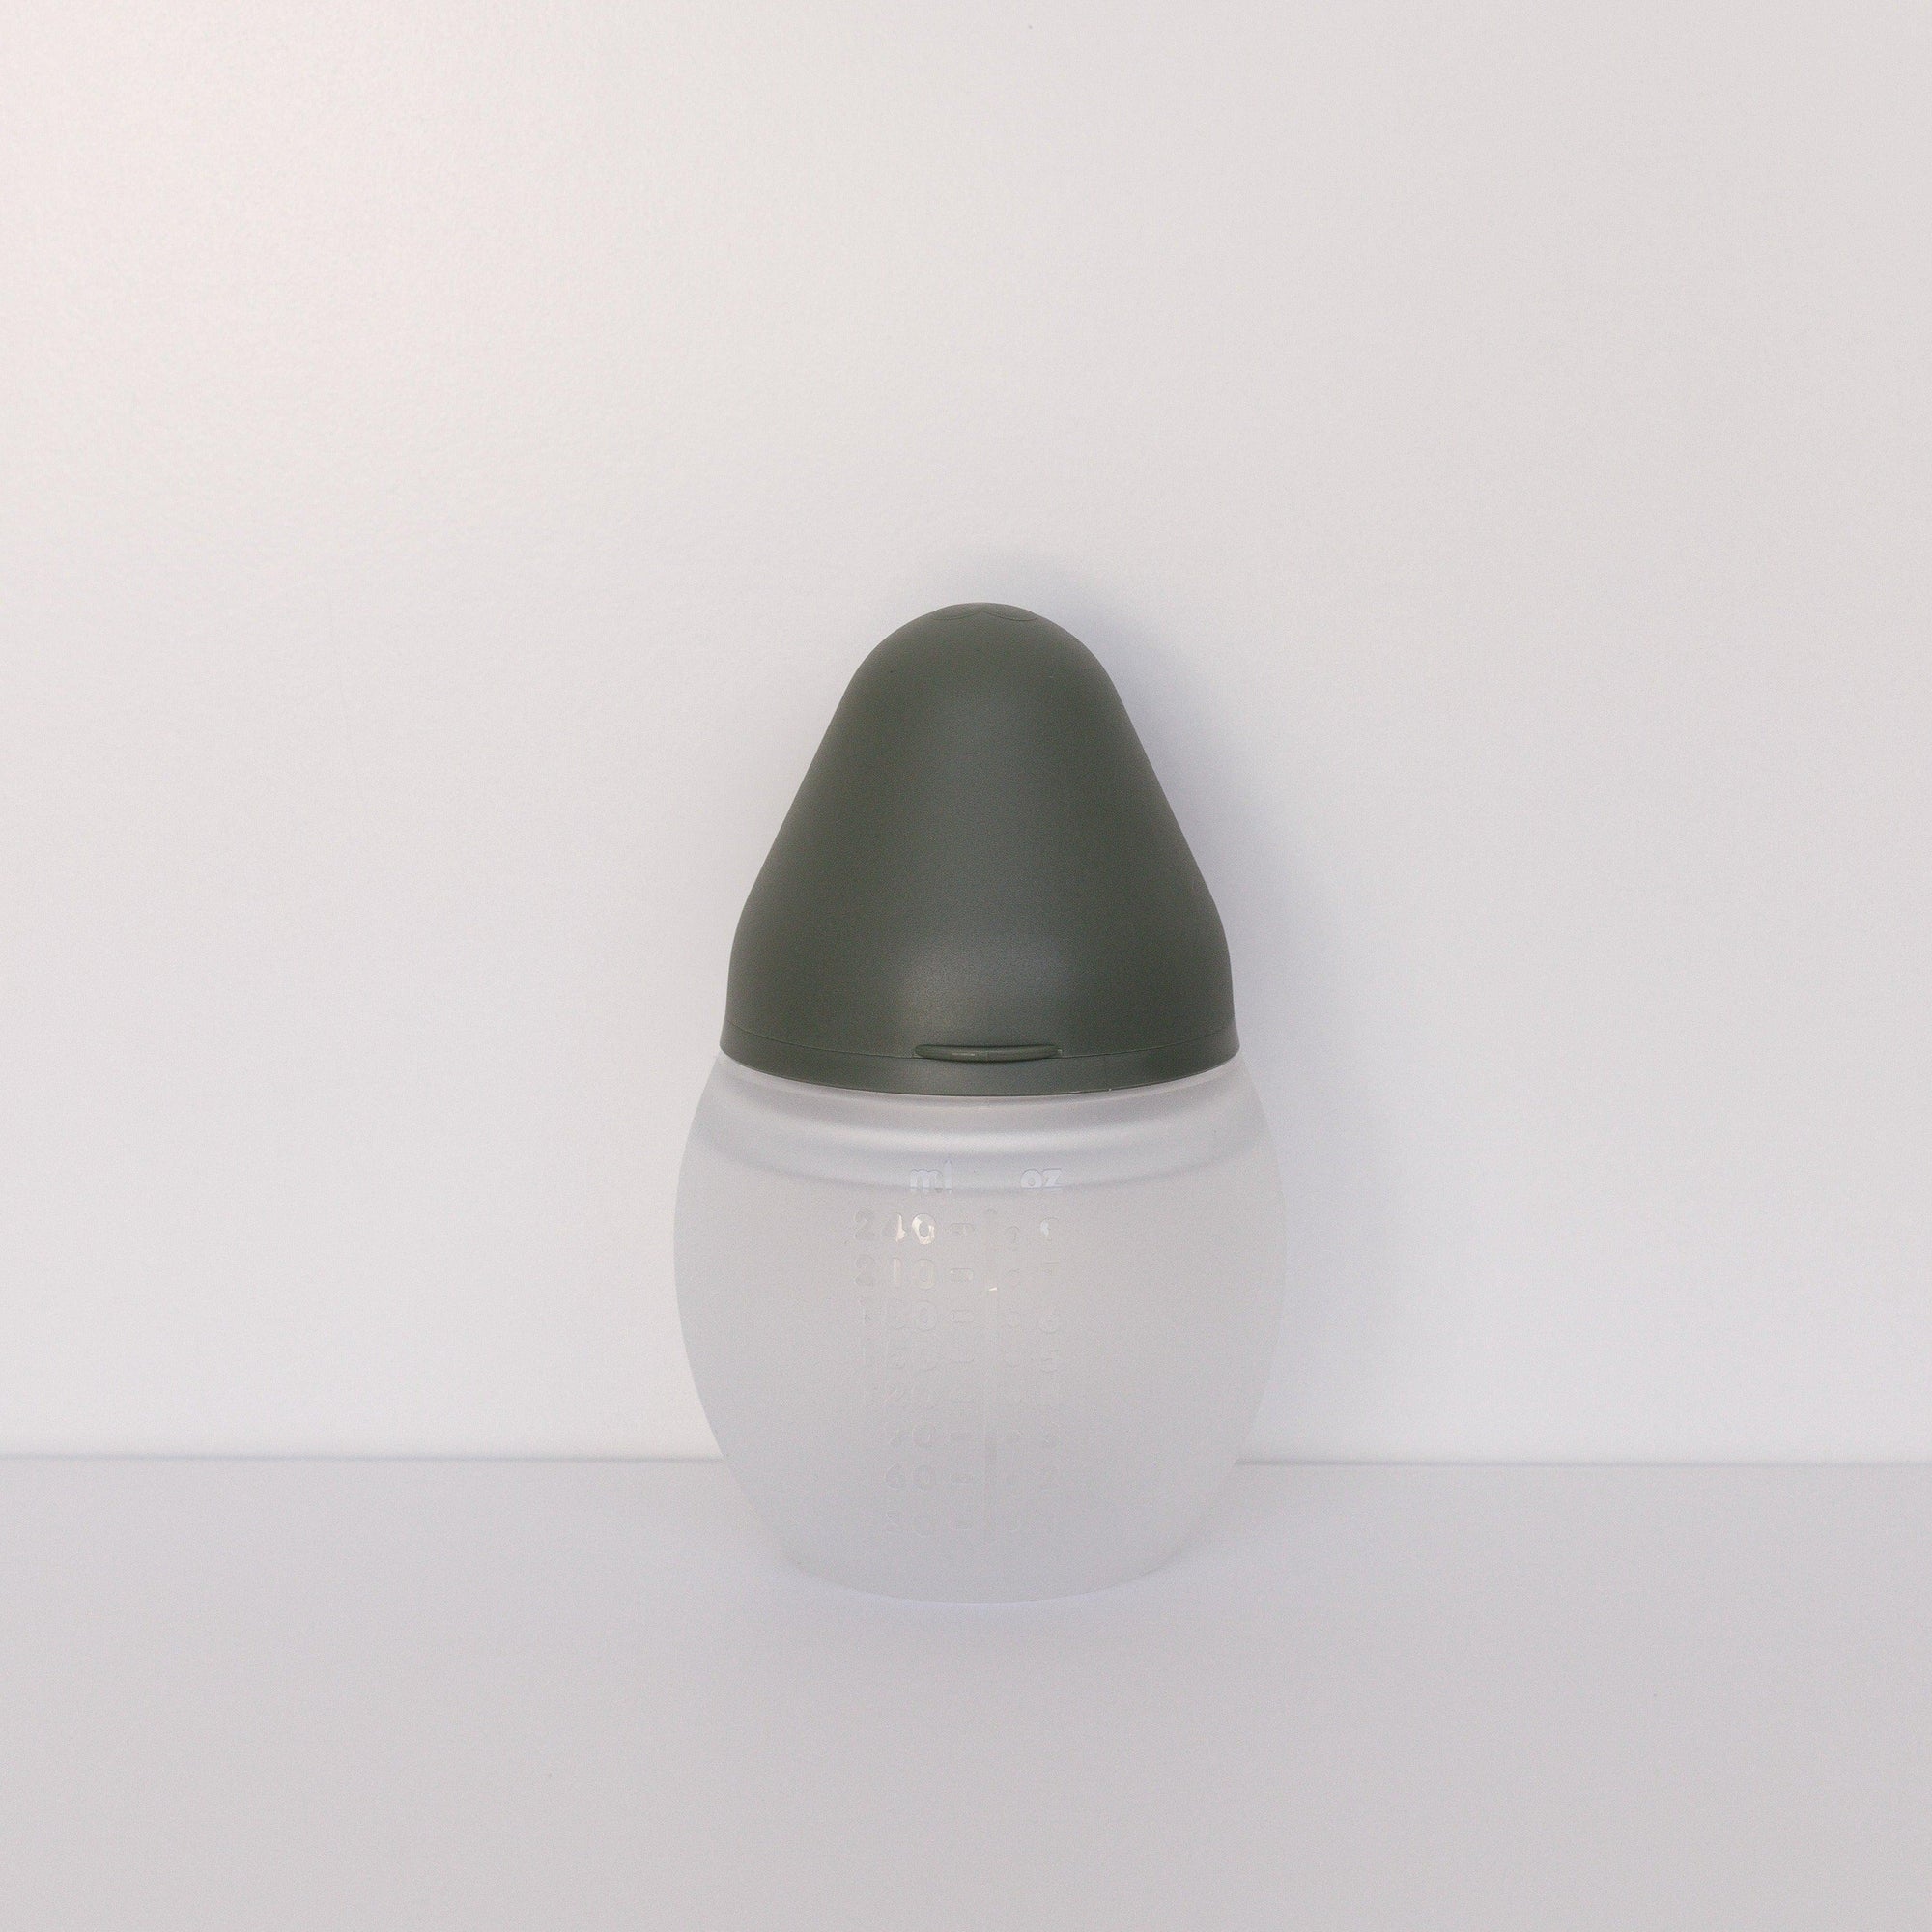 A BibRond khaki bottle from Elhée France standing against a white surface.